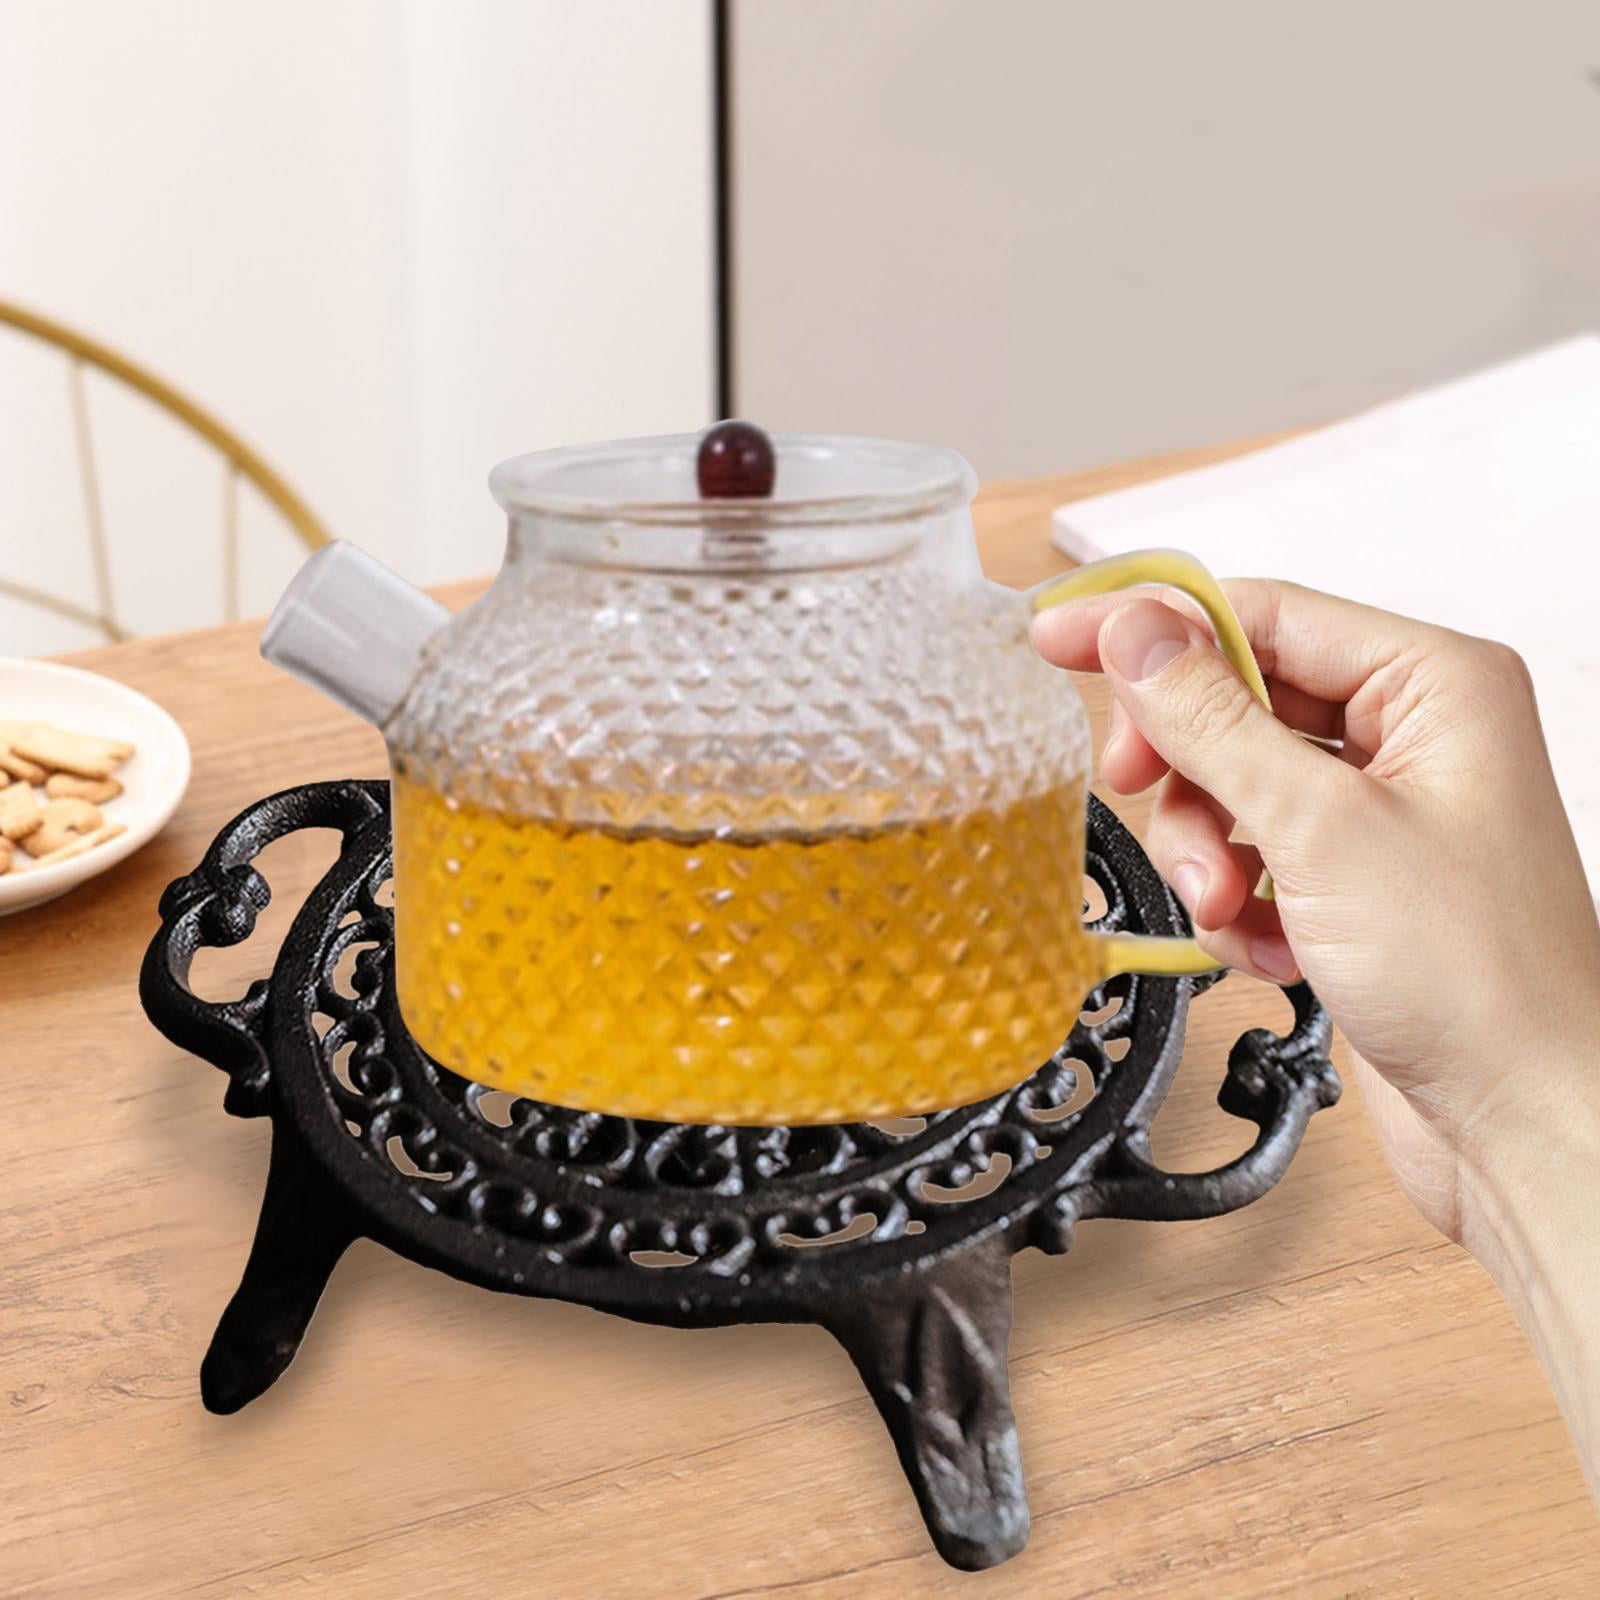 Universal Teapot Warmer - Beautiful Aluminum alloy Warmers|Tea Pot Heater  in Frosted Gold with Ornate Design.